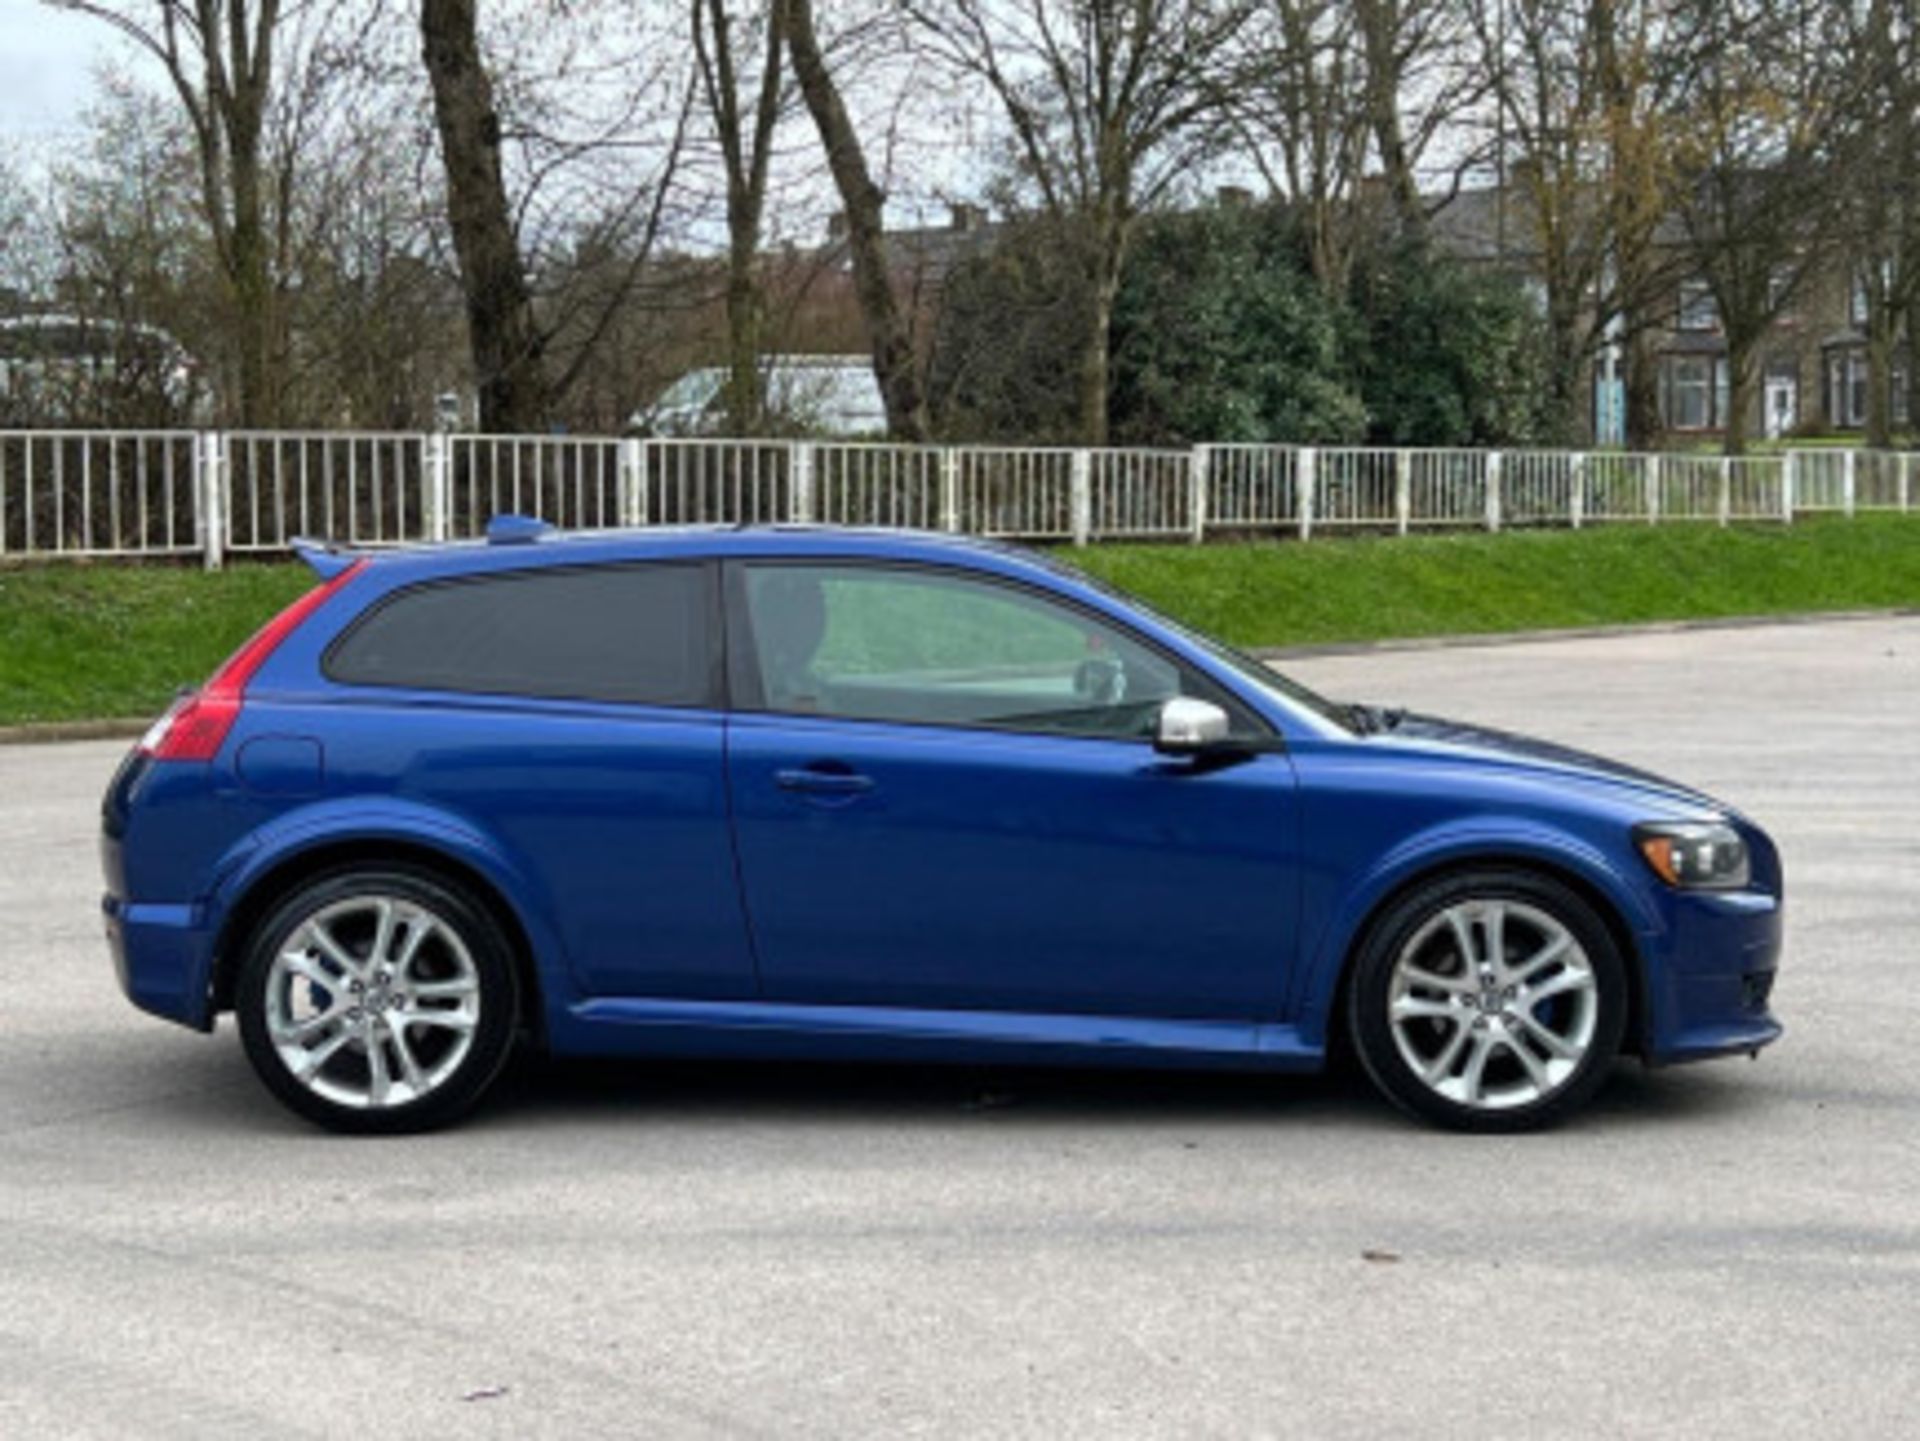 VOLVO C30 2.0D R-DESIGN SPORT 2DR - SPORTY AND LUXURIOUS COMPACT CAR >>--NO VAT ON HAMMER--<< - Image 44 of 103